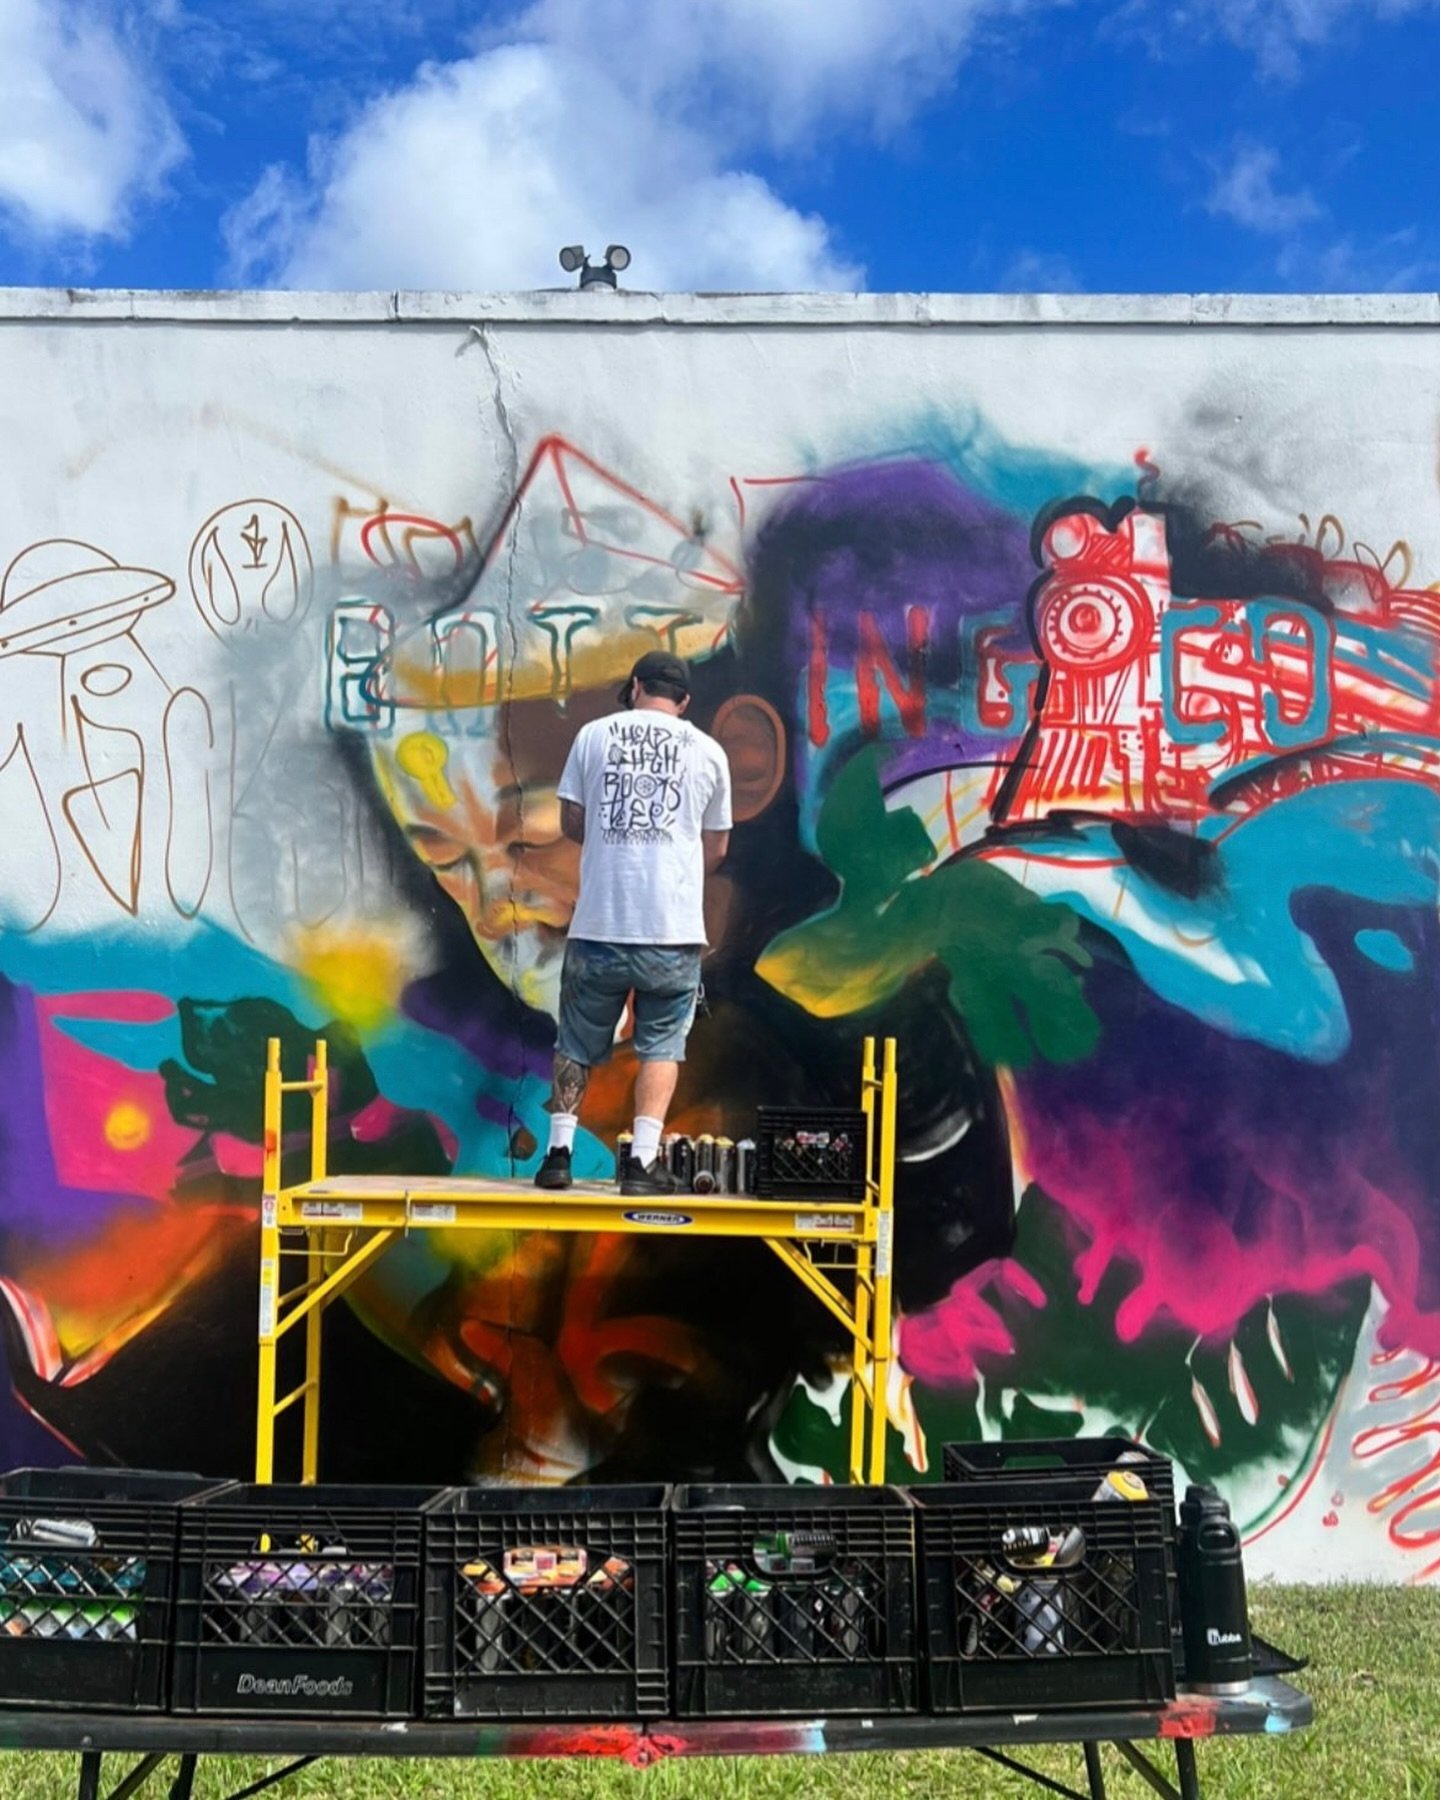 Did you catch @elena_ohlander on @fcconair spreading the word about the mural jam in the Phoenix Arts &amp; Innovation District this weekend? Listen to the segment on the @wjctjax YouTube channel and come out to watch the artists in action between 10